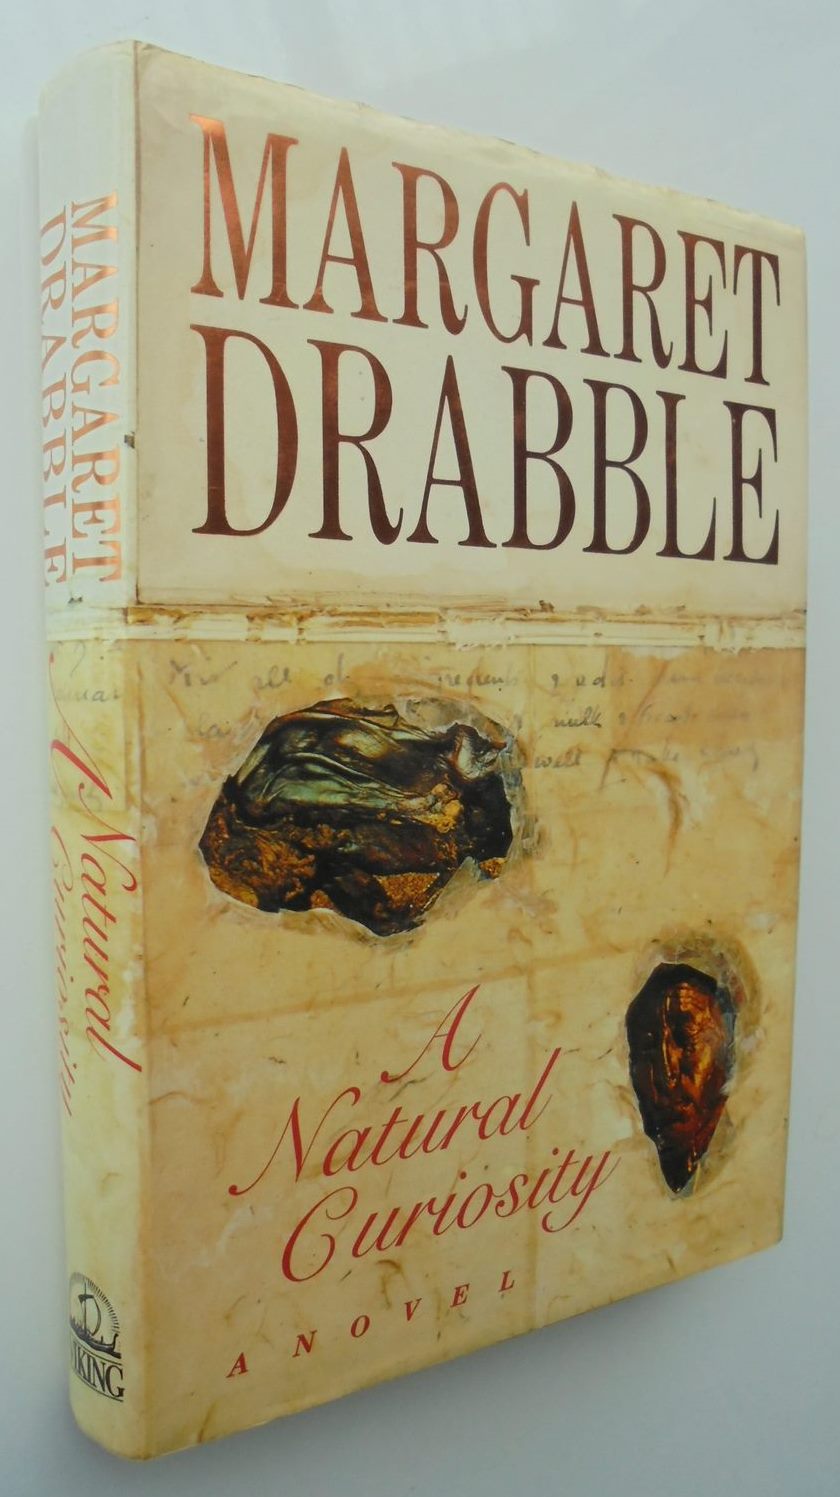 A Natural Curiosity. SIGNED By Margaret Drabble. Hardback 1st edition